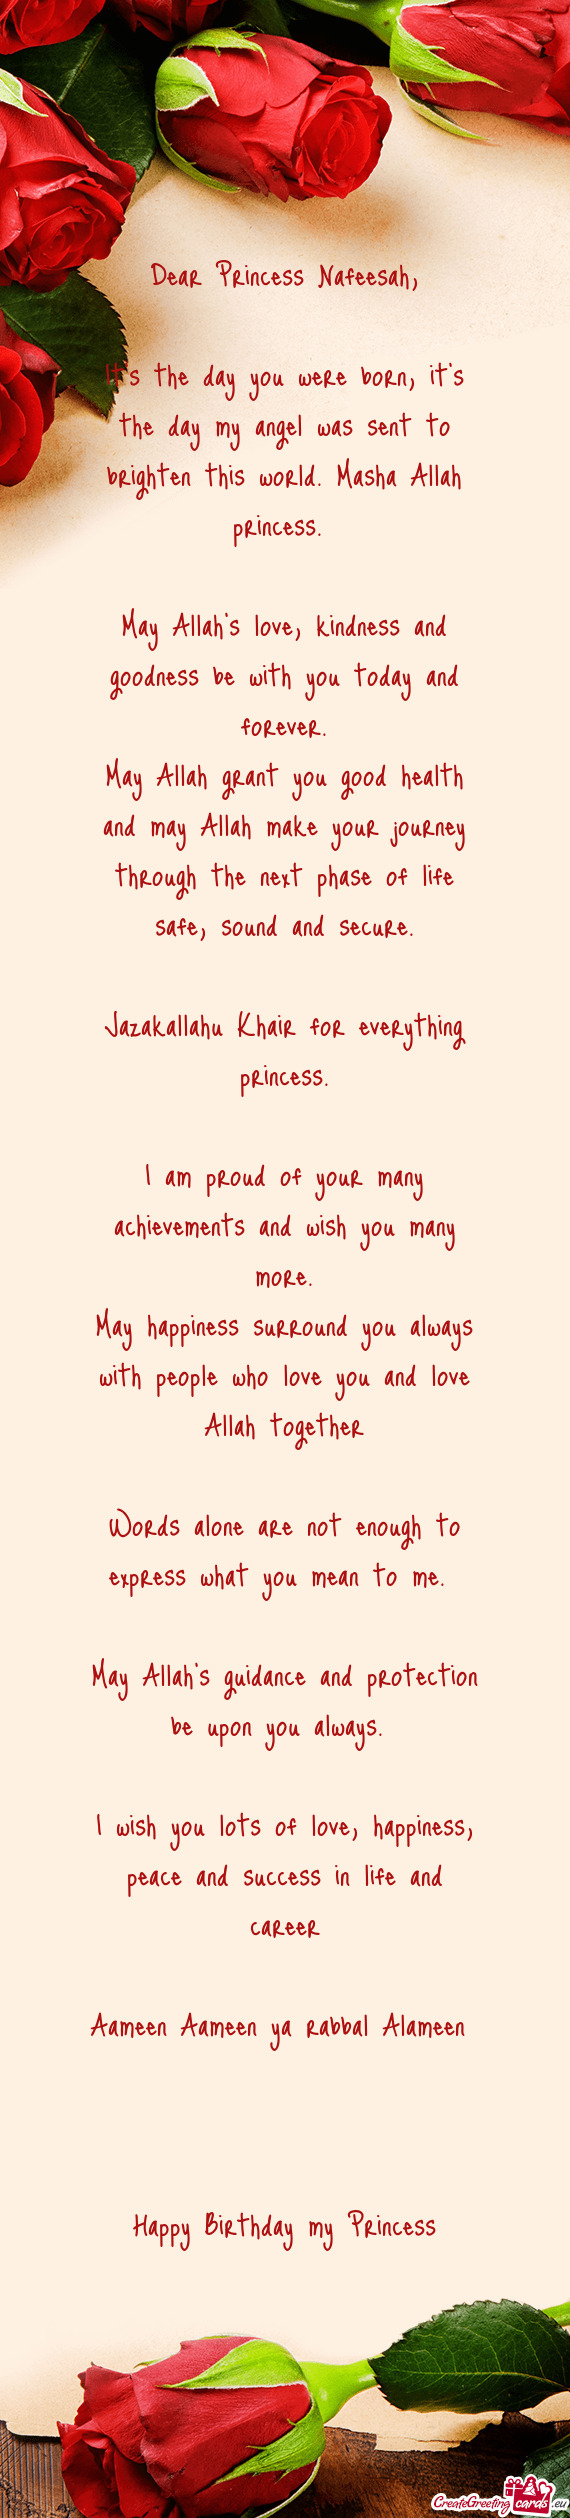 May Allah’s love, kindness and goodness be with you today and forever